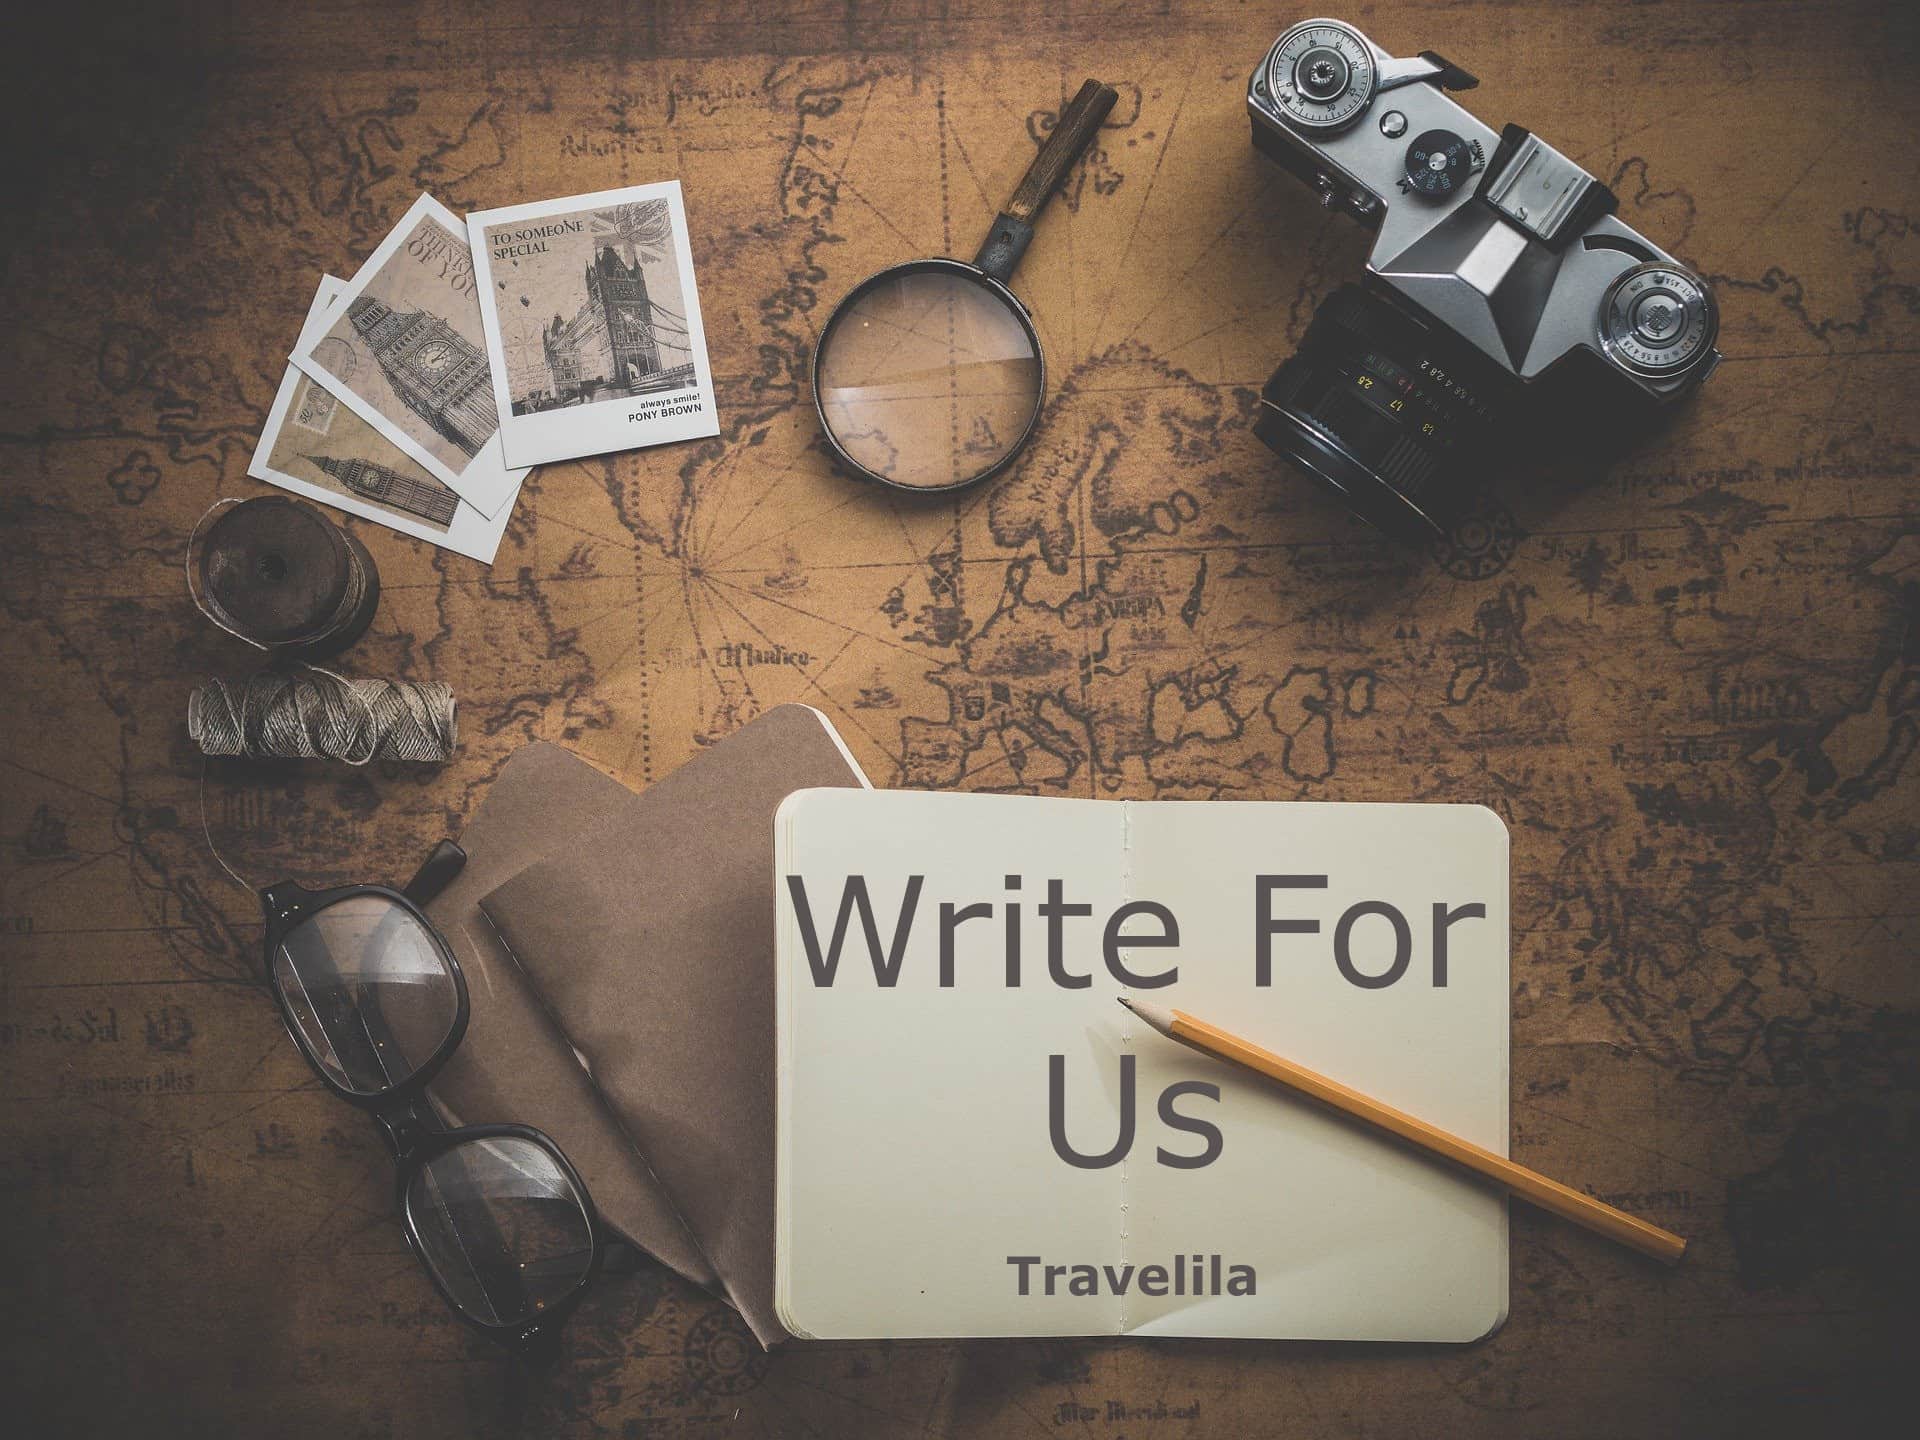 Write for us travel